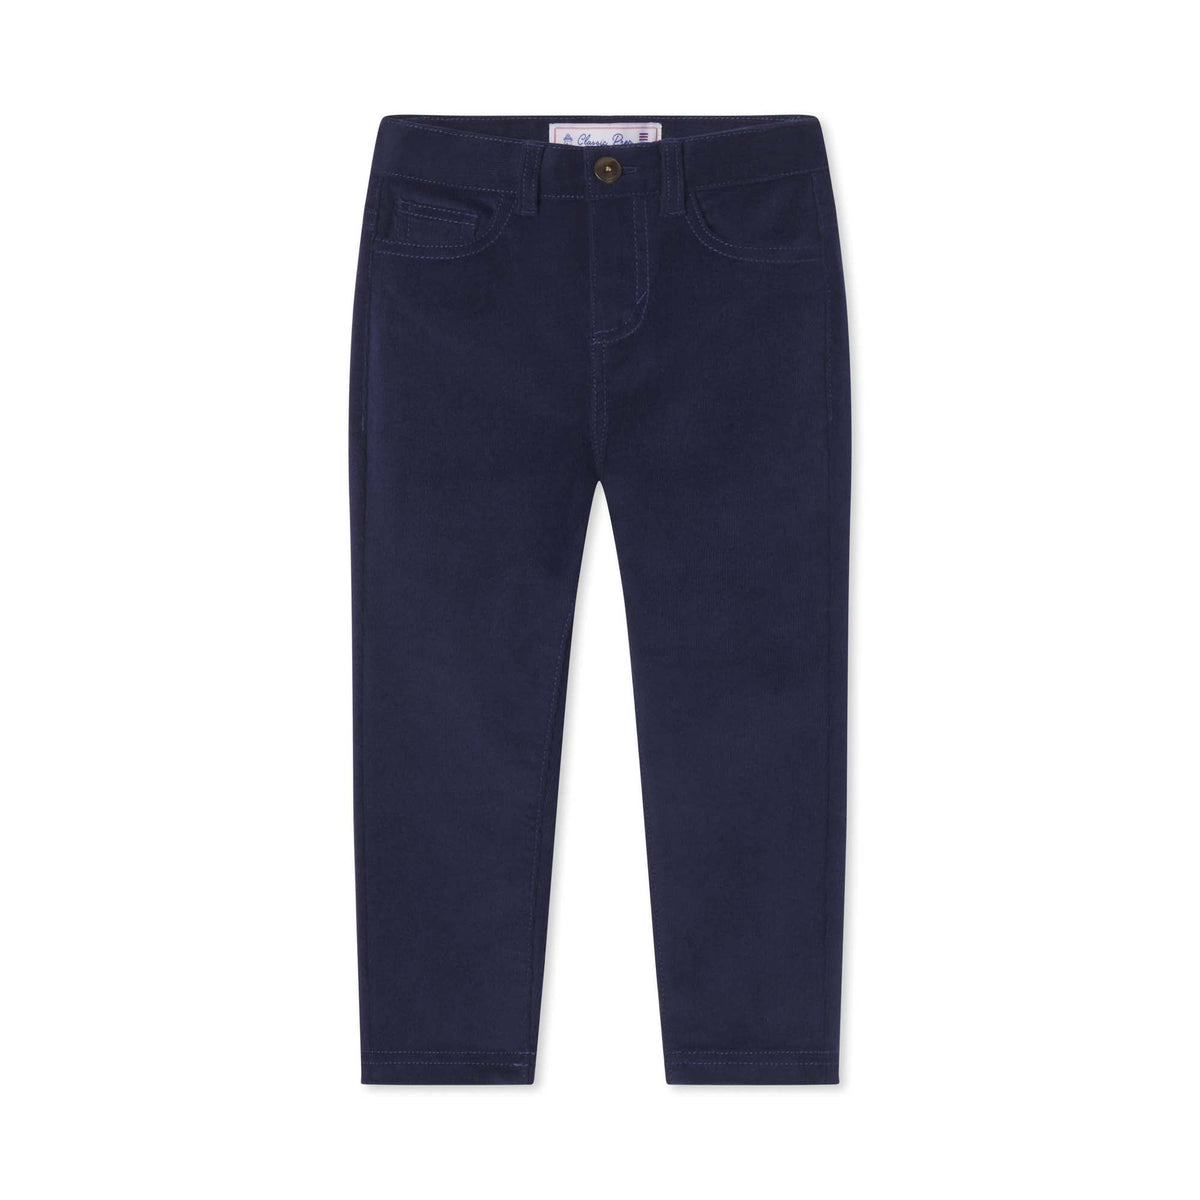 Classic and Preppy Jane 5 Pocket Pant Stretch 21W Corduroy, Medieval Blue-Bottoms-Medieval Blue-2T-CPC - Classic Prep Childrenswear